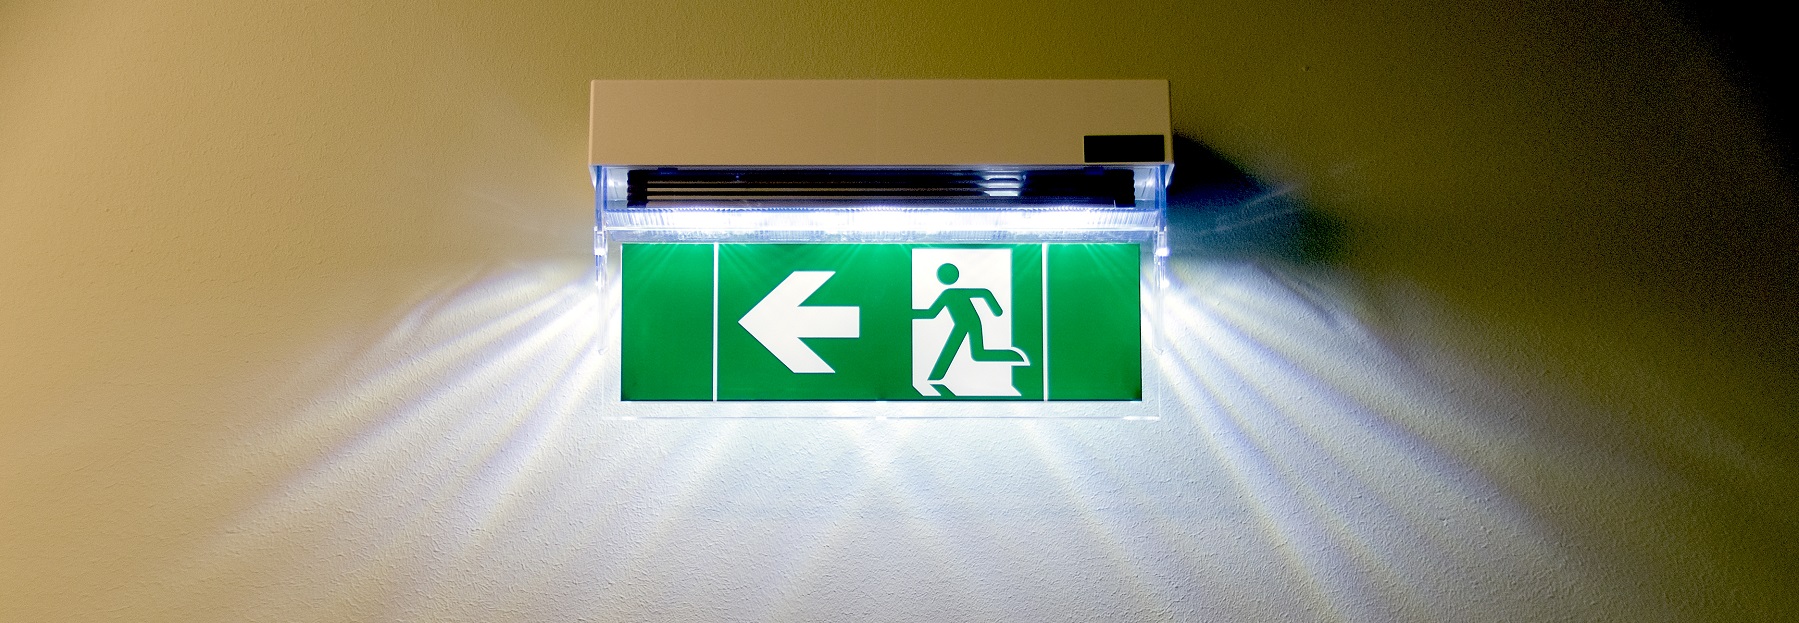 Emergency lighting and fire safety Cardiff Swansea Wales